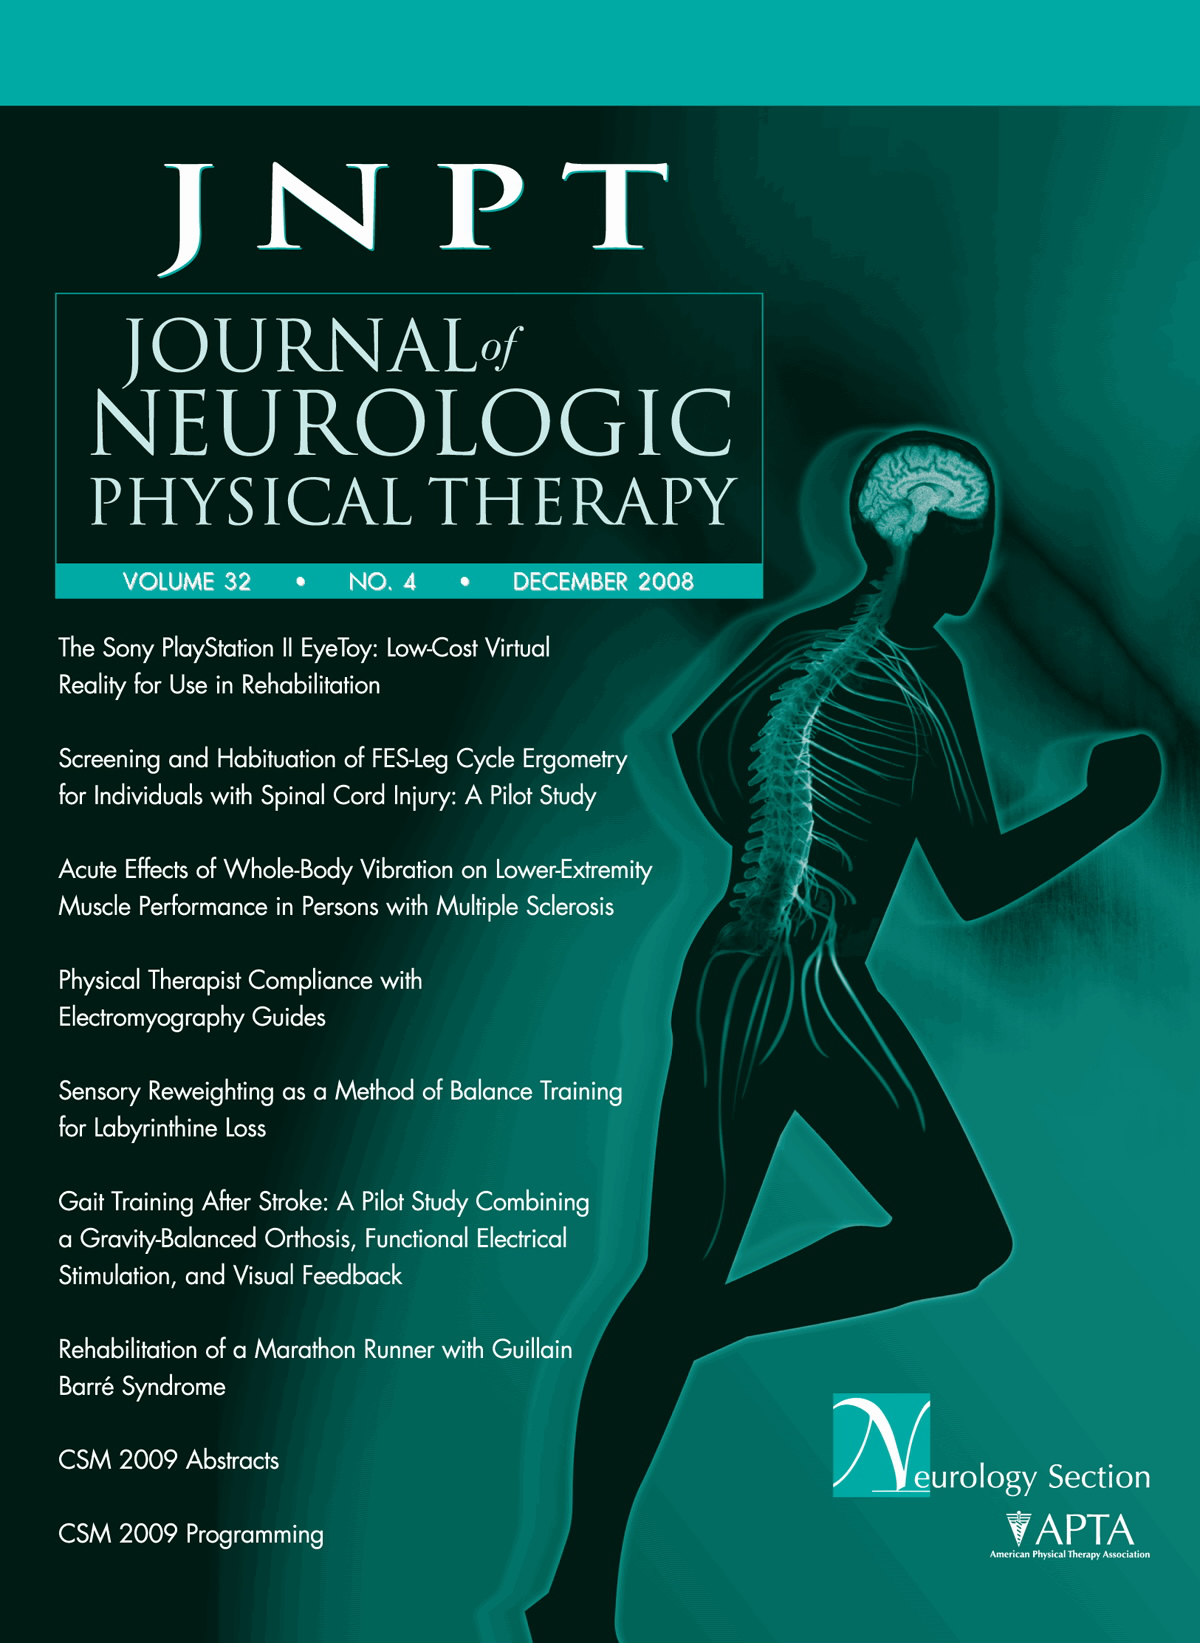 Journal of Neurologic Physical Therapy